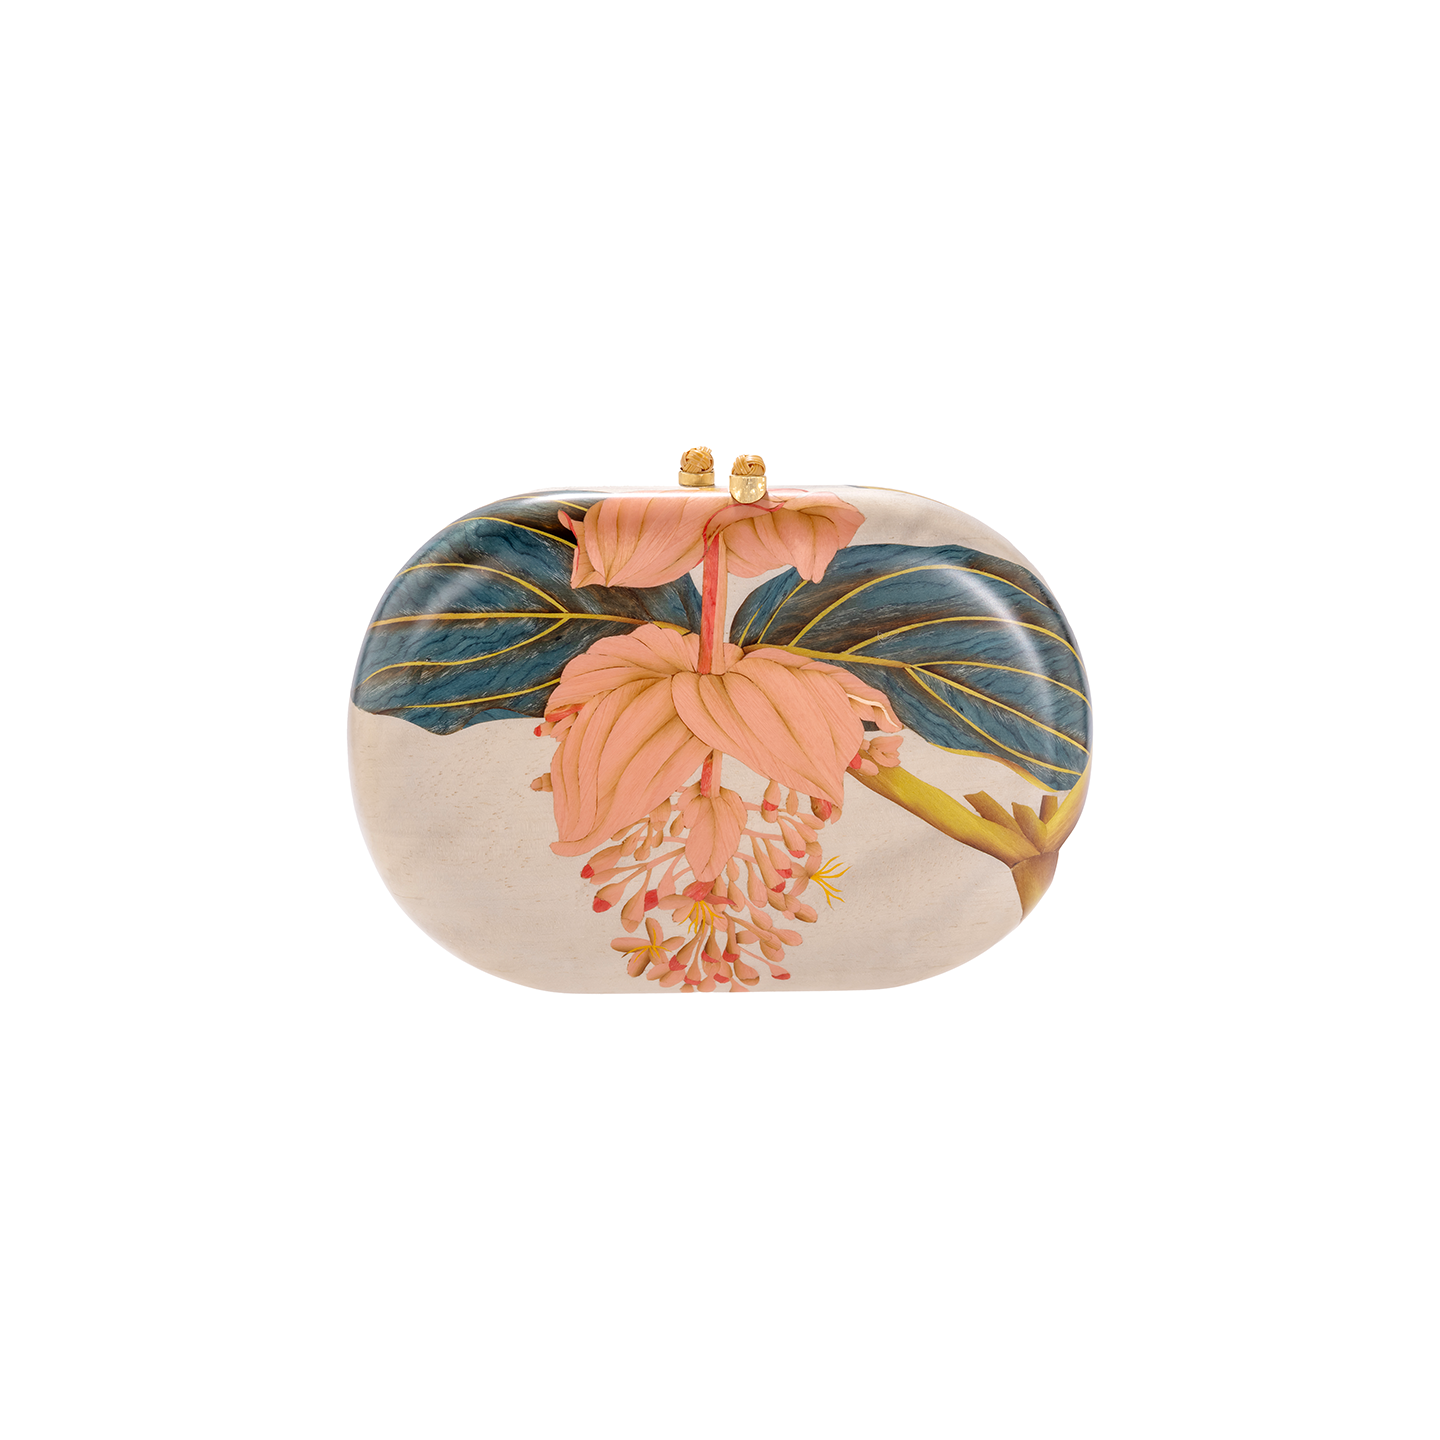 Silvia Furmanovich Marquetry Clutch with Bamboo and Pink Flower Motif